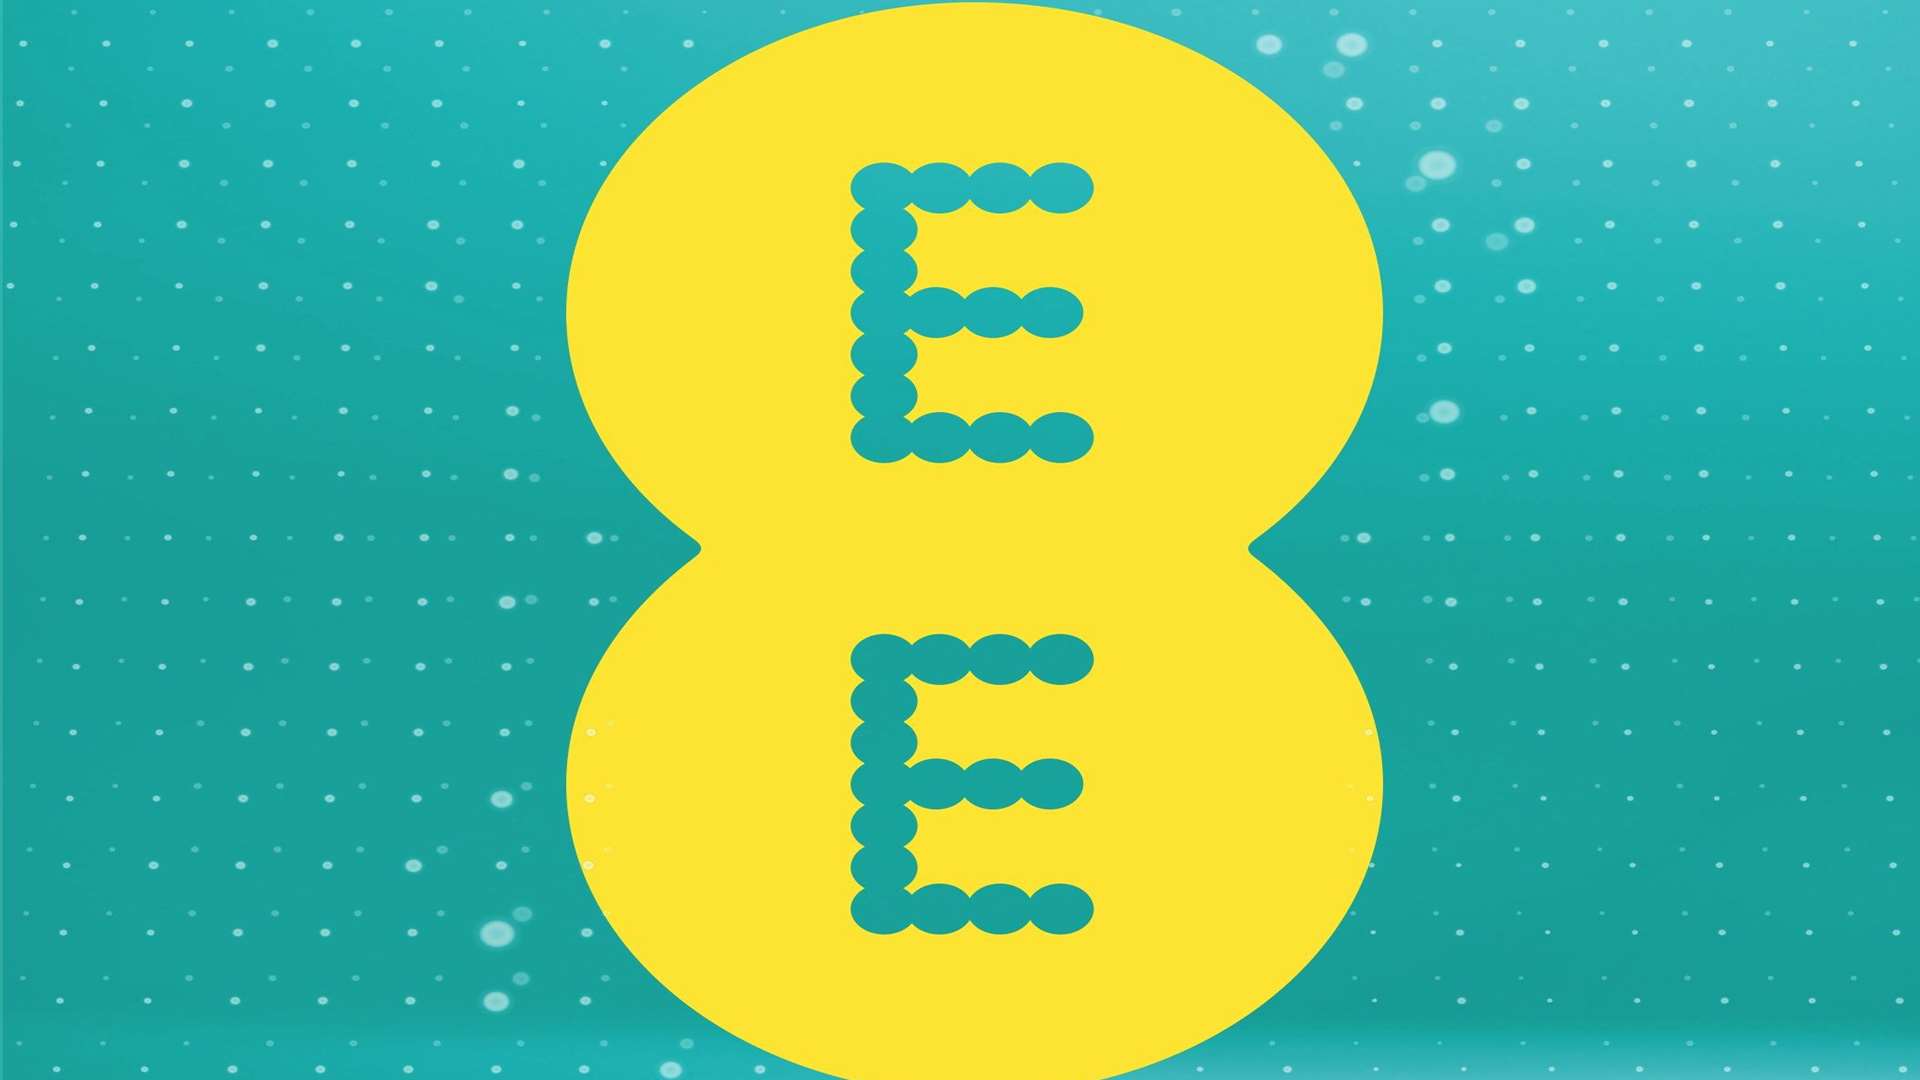 EE, formerly Orange, has restored a full service in Deal